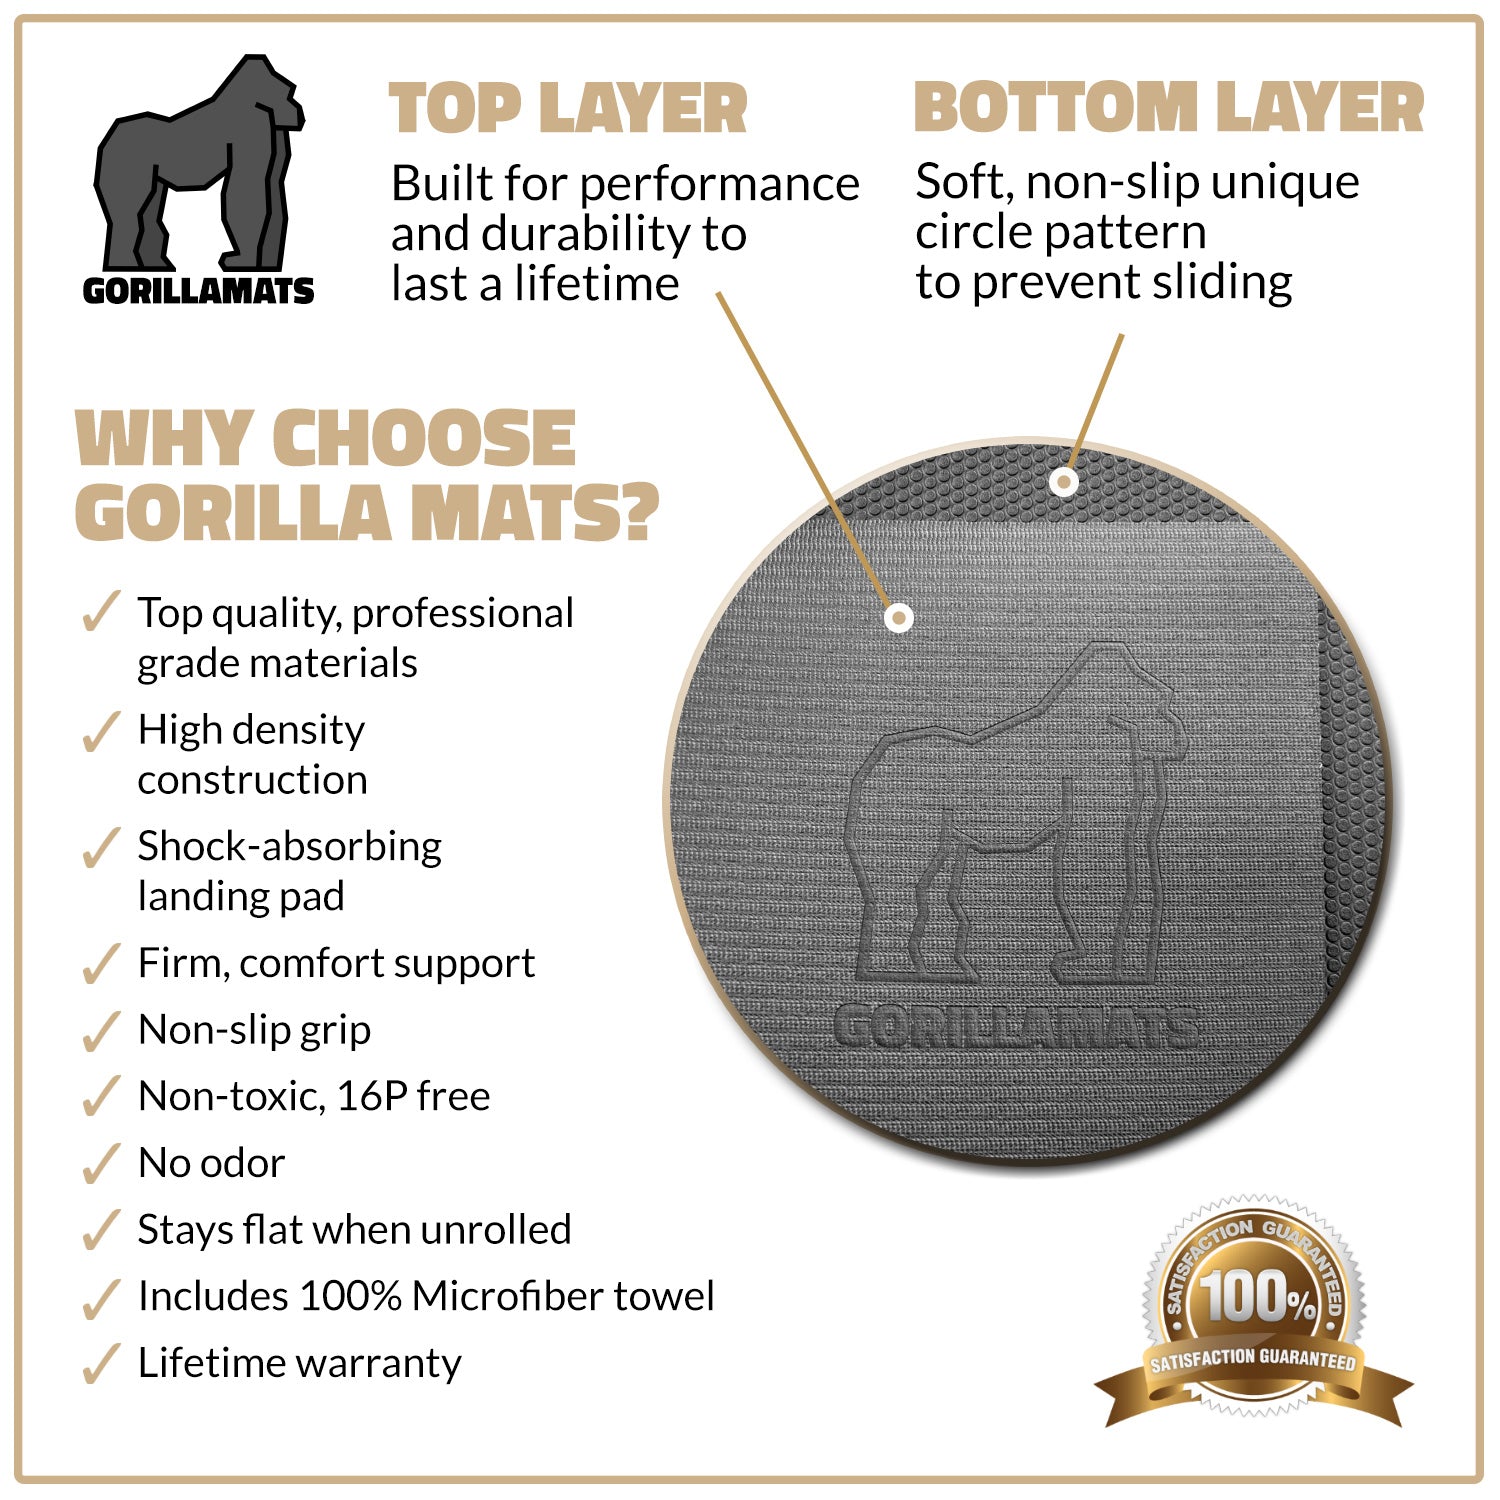 Gorilla Mats Premium Large Exercise Mat – 6' x 4' x 1/4 Ultra Durable, Non-Slip, Workout Mat for Instant Home Gym Flooring – Works Great on Any